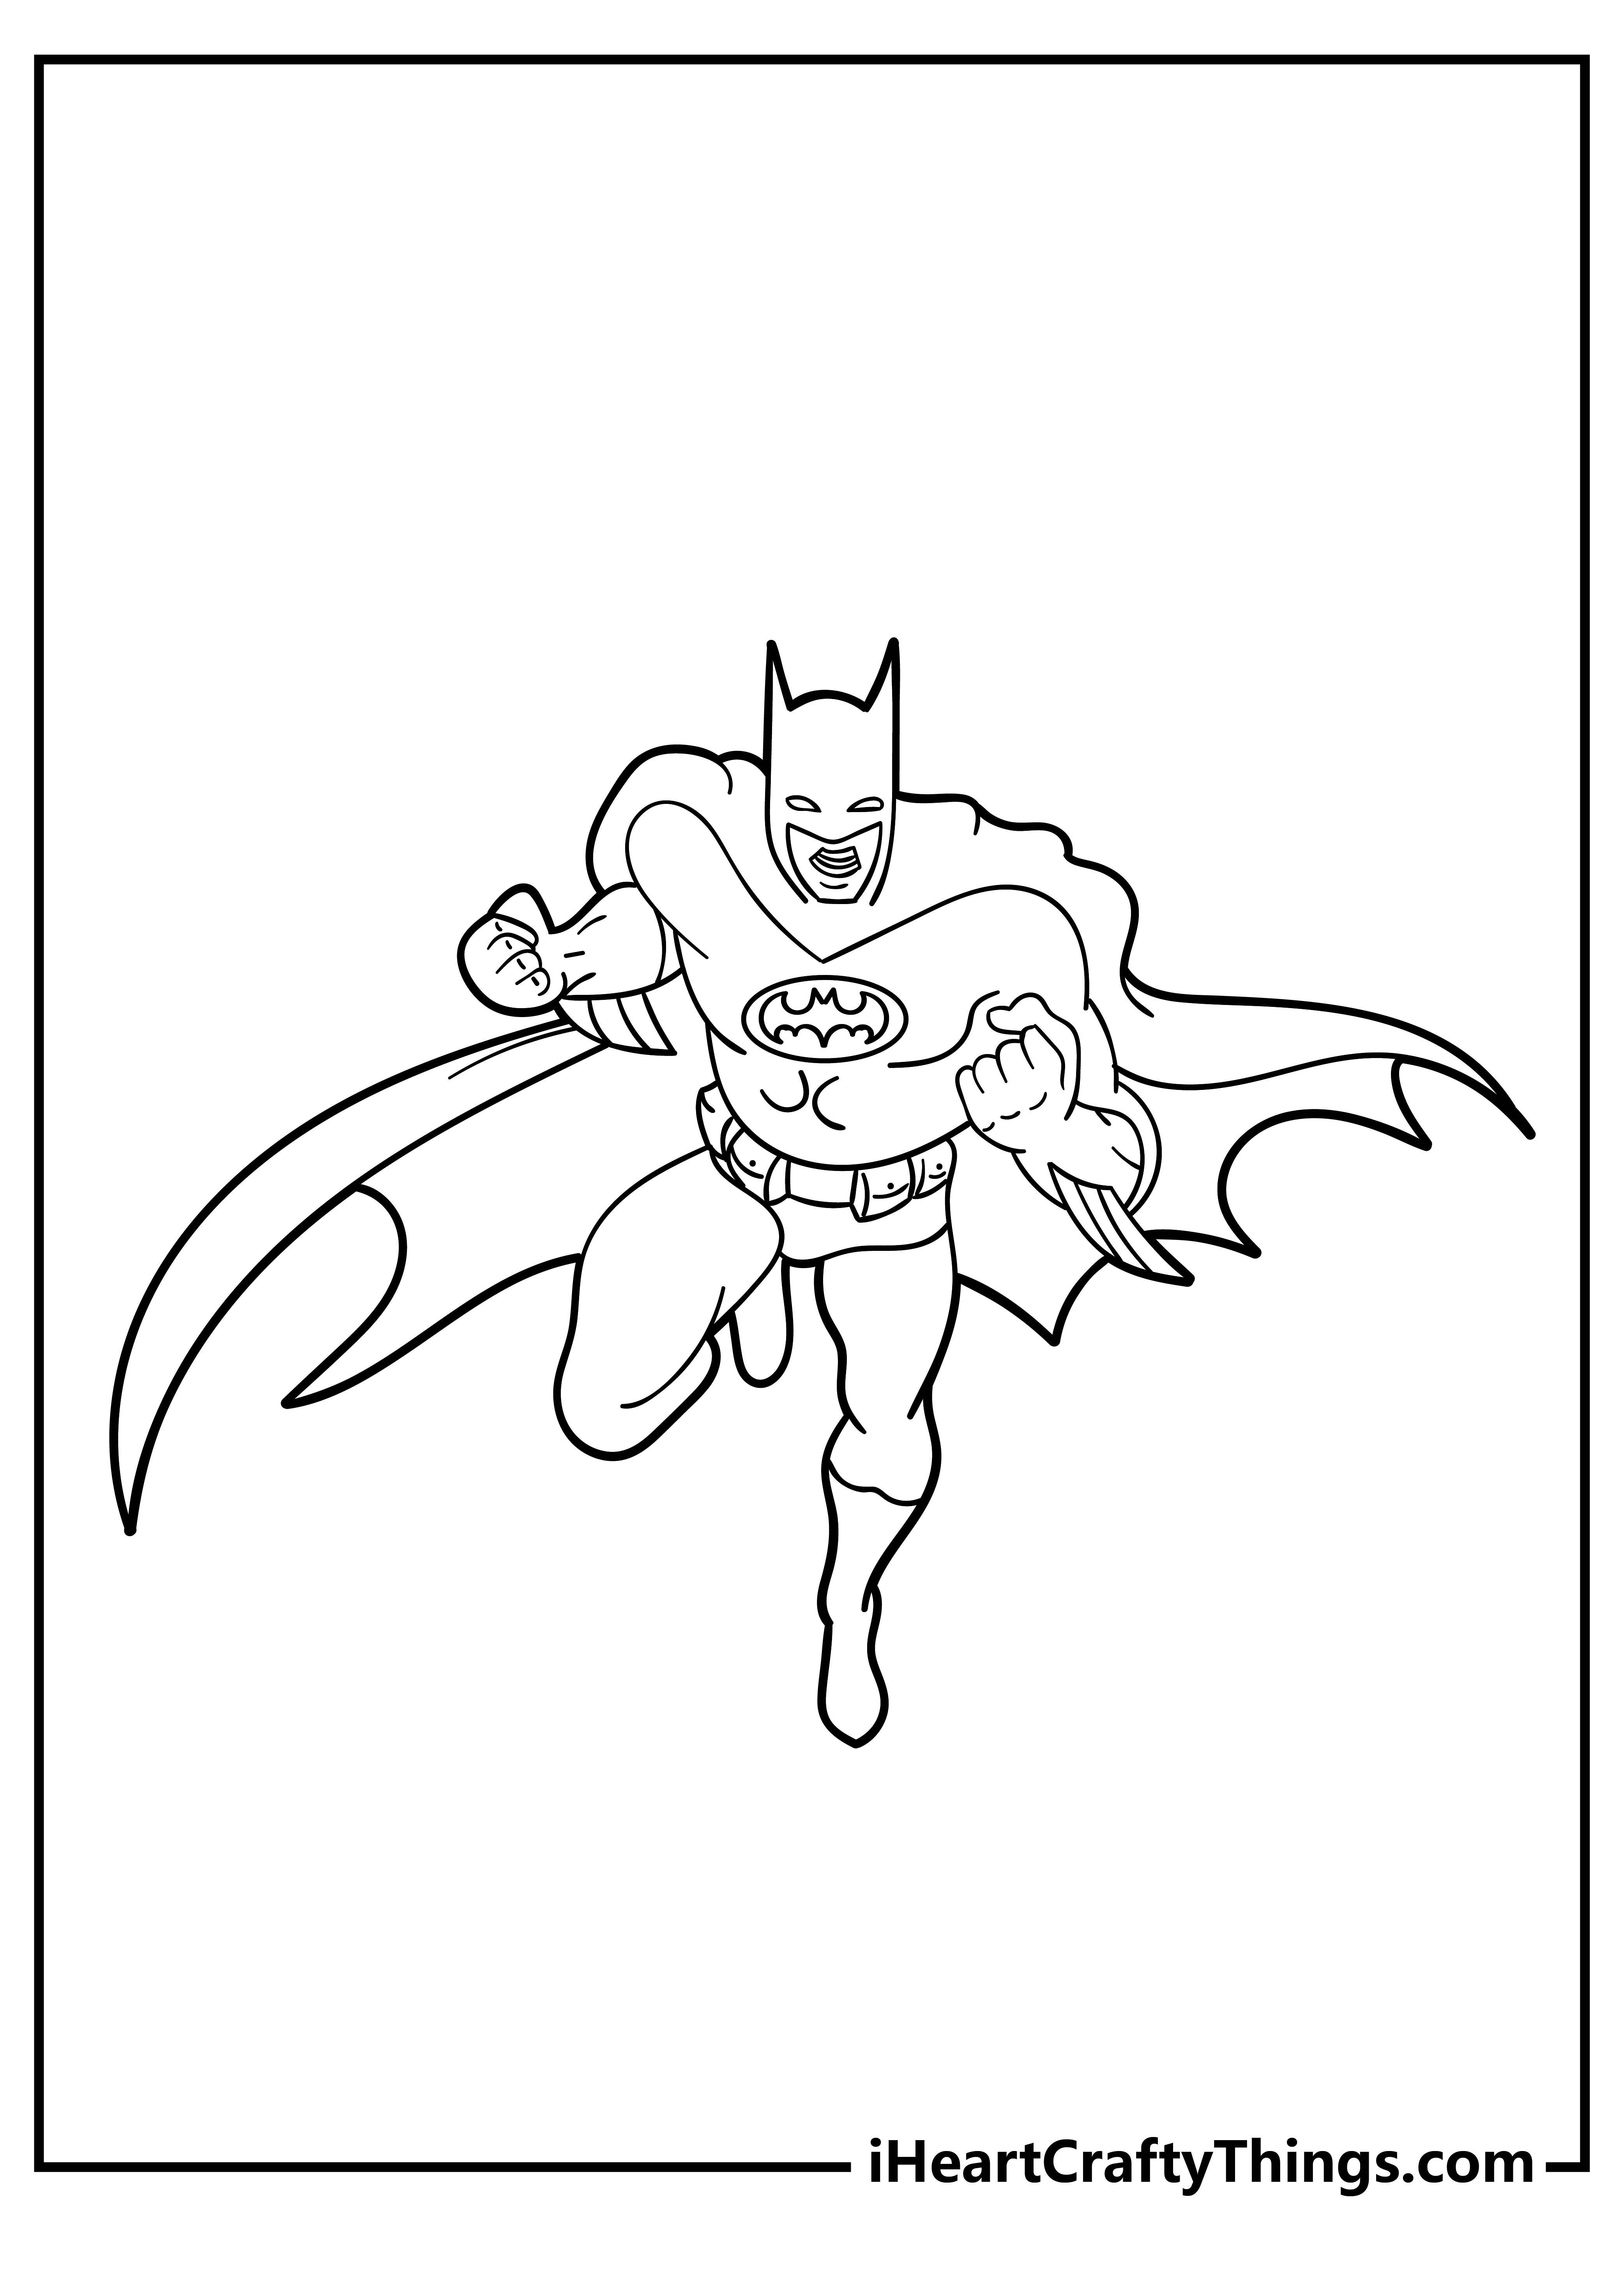 Batman Coloring Pages for adults free printable